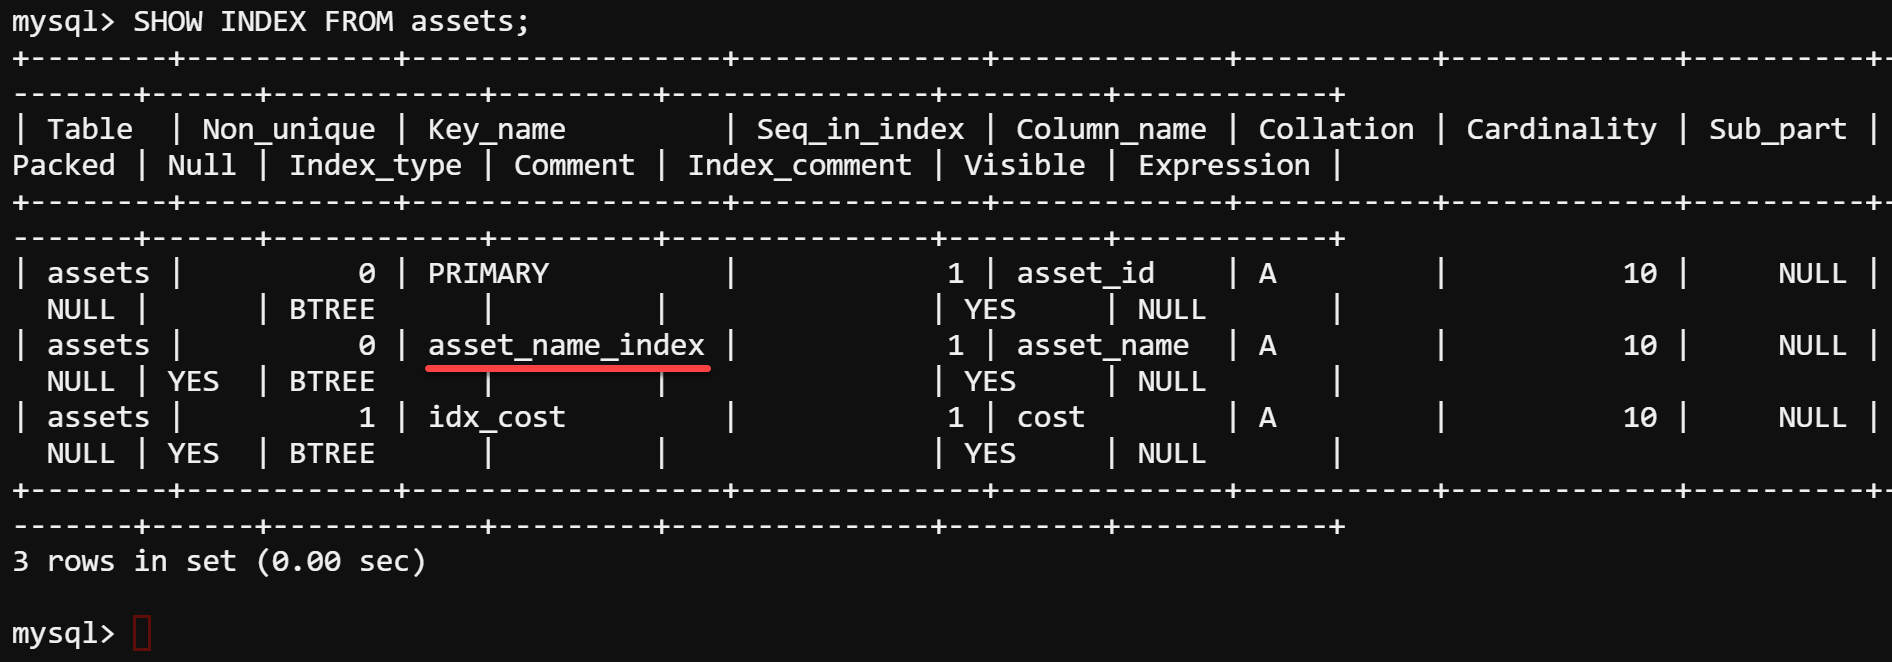 Listing all indexes from the assets table